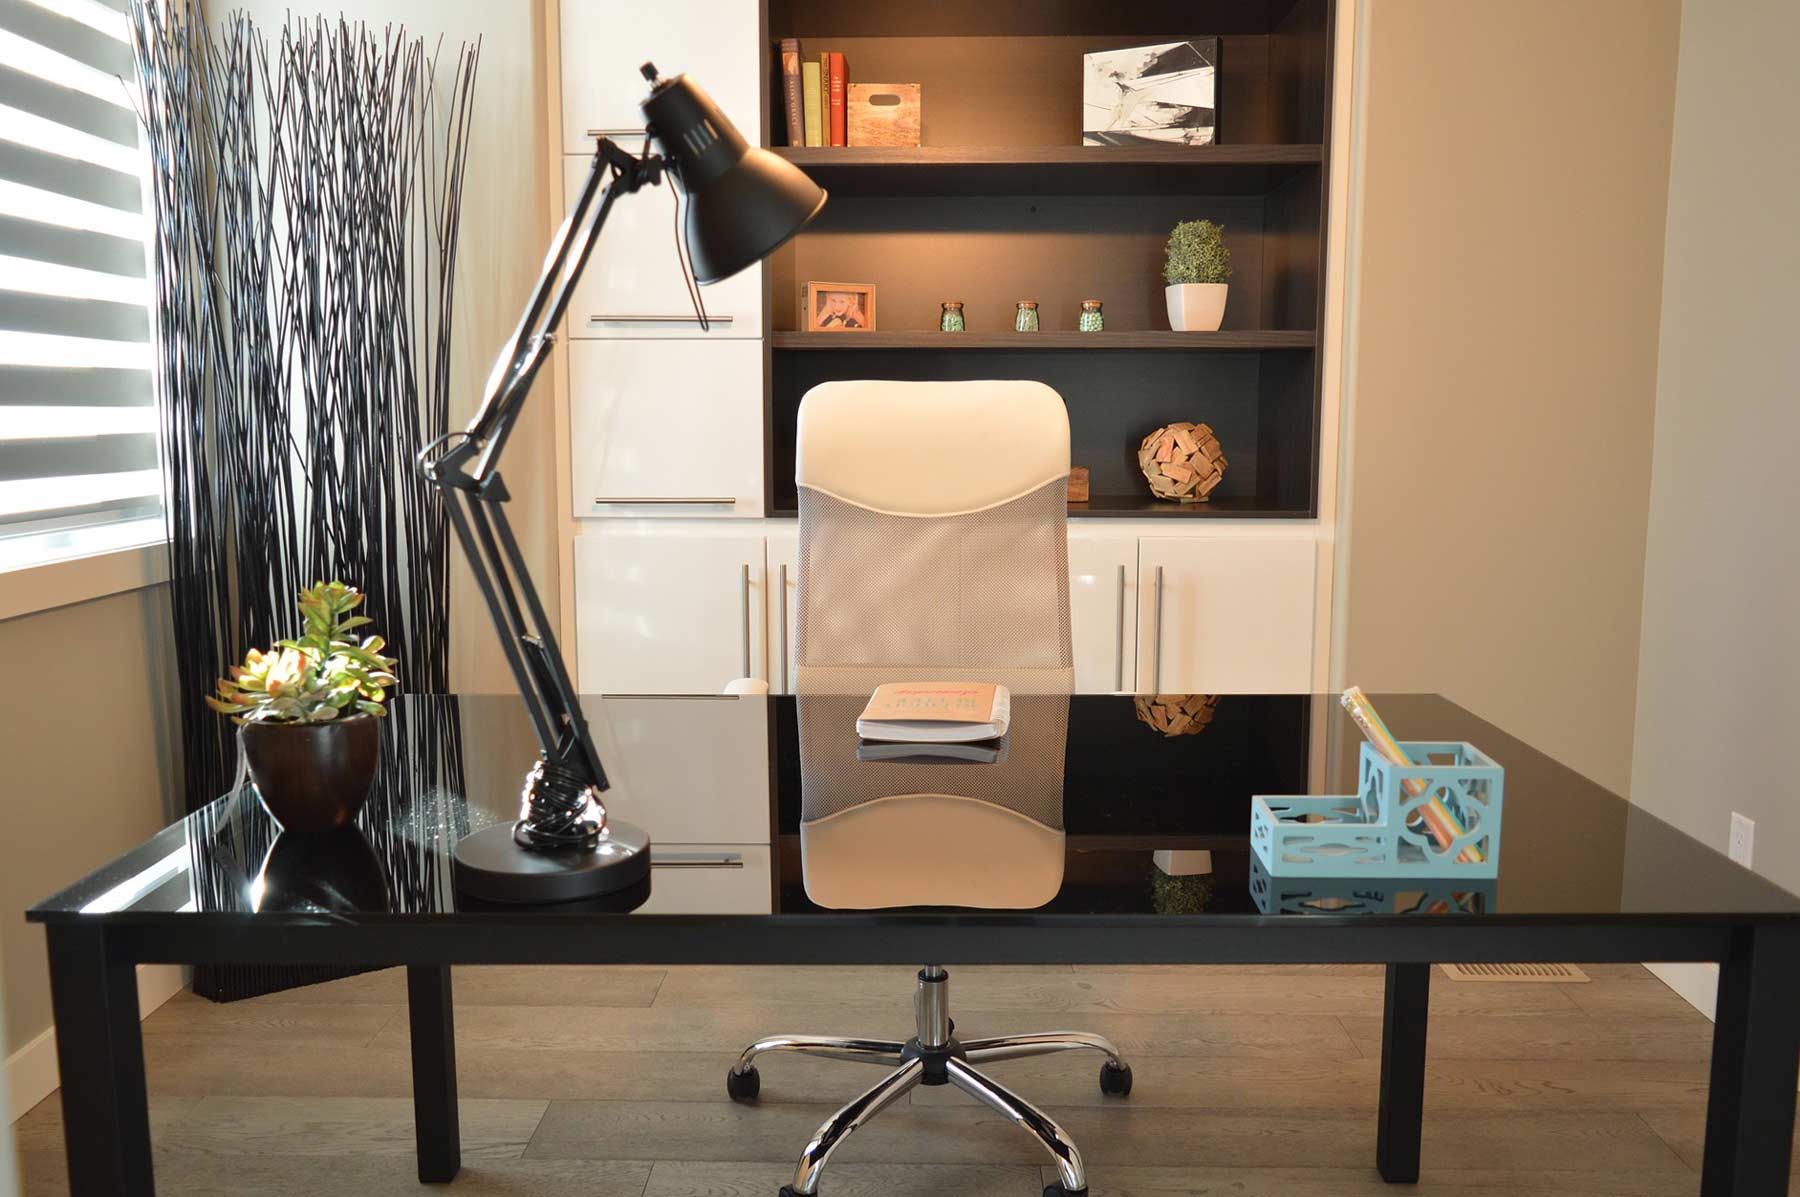 Home Offices – A Top Renovation Trend in 2022